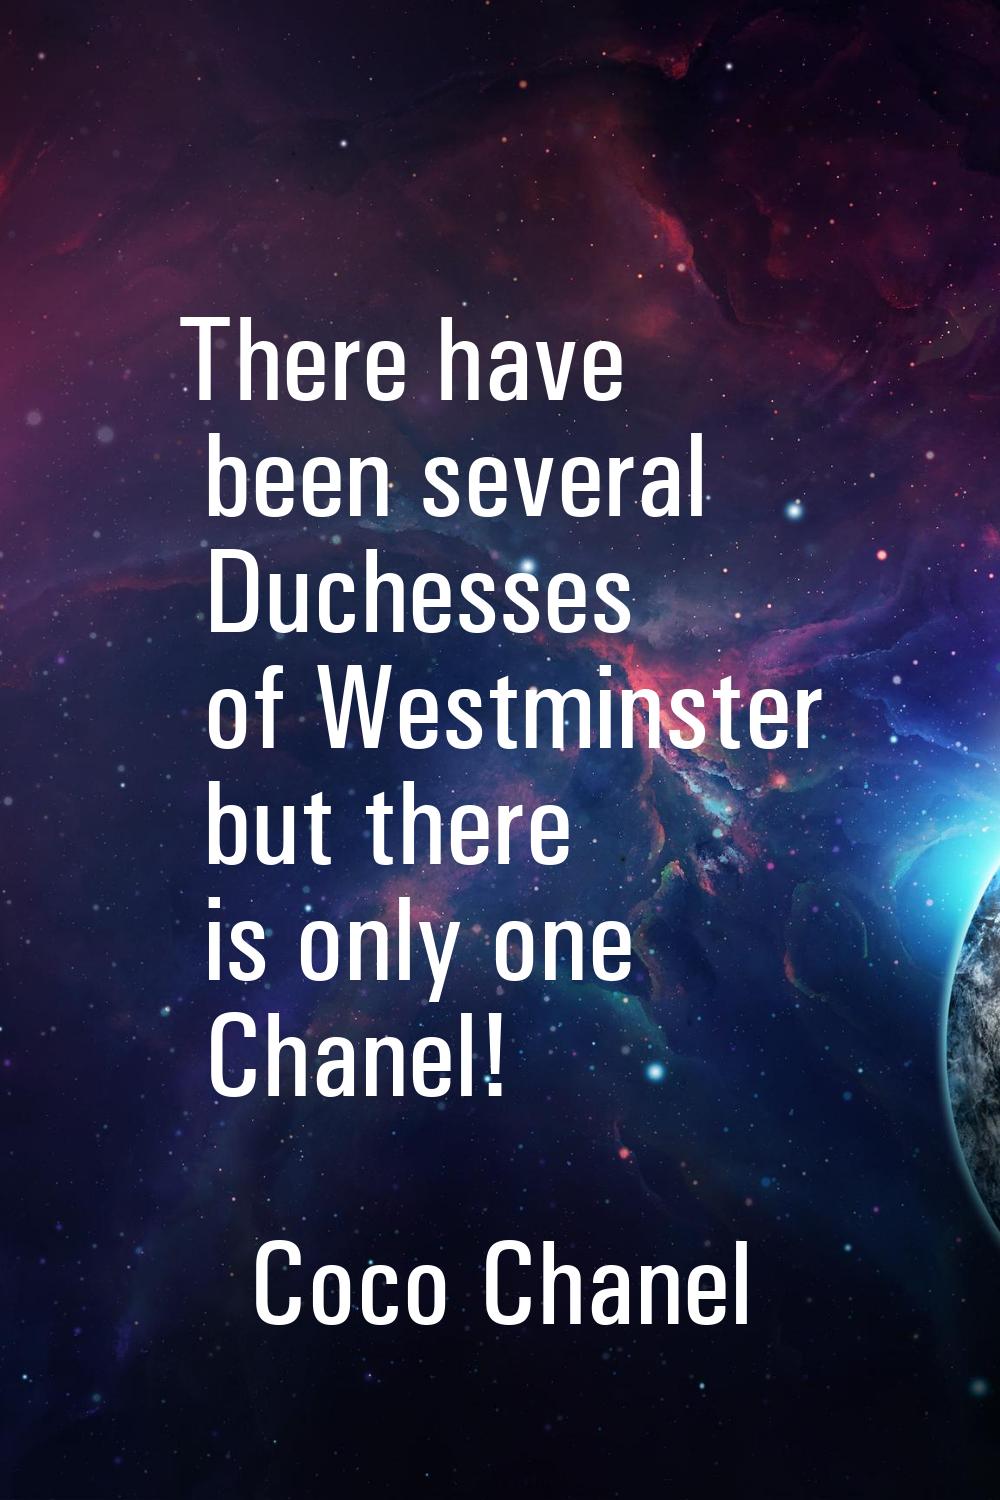 There have been several Duchesses of Westminster but there is only one Chanel!